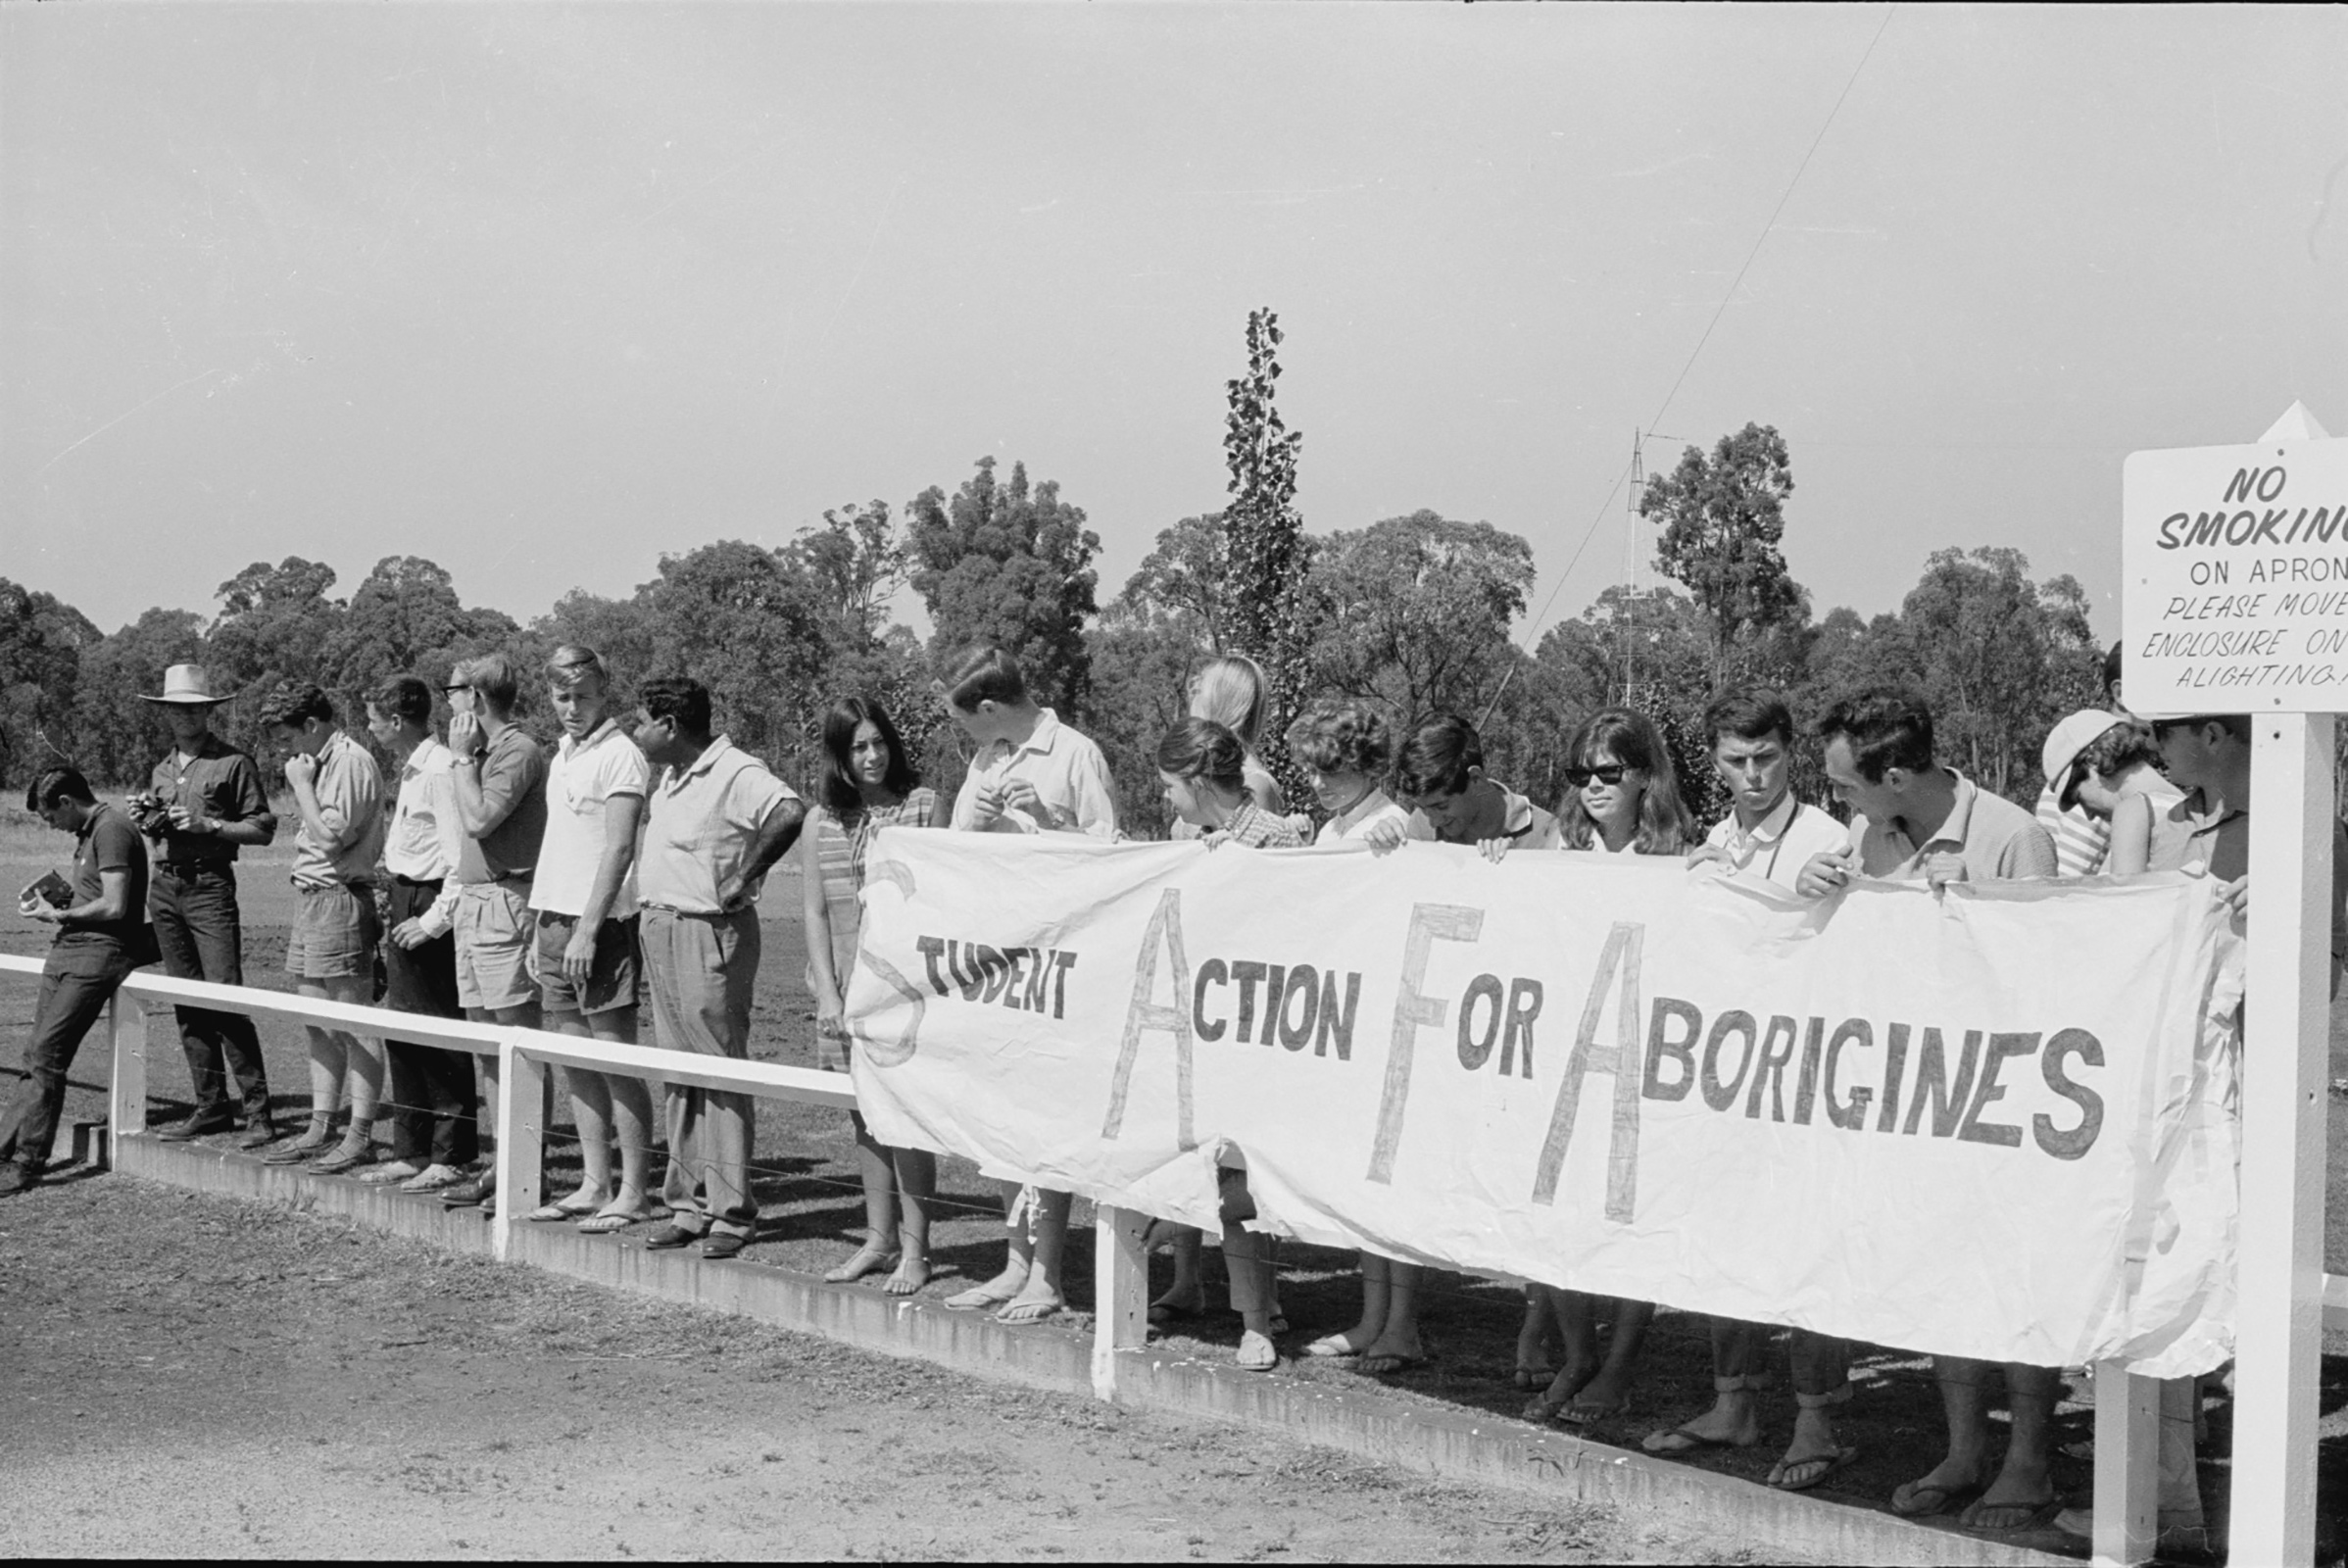 Student Action for Aboriginals (SAFA) activists with banner at Inverell Airport